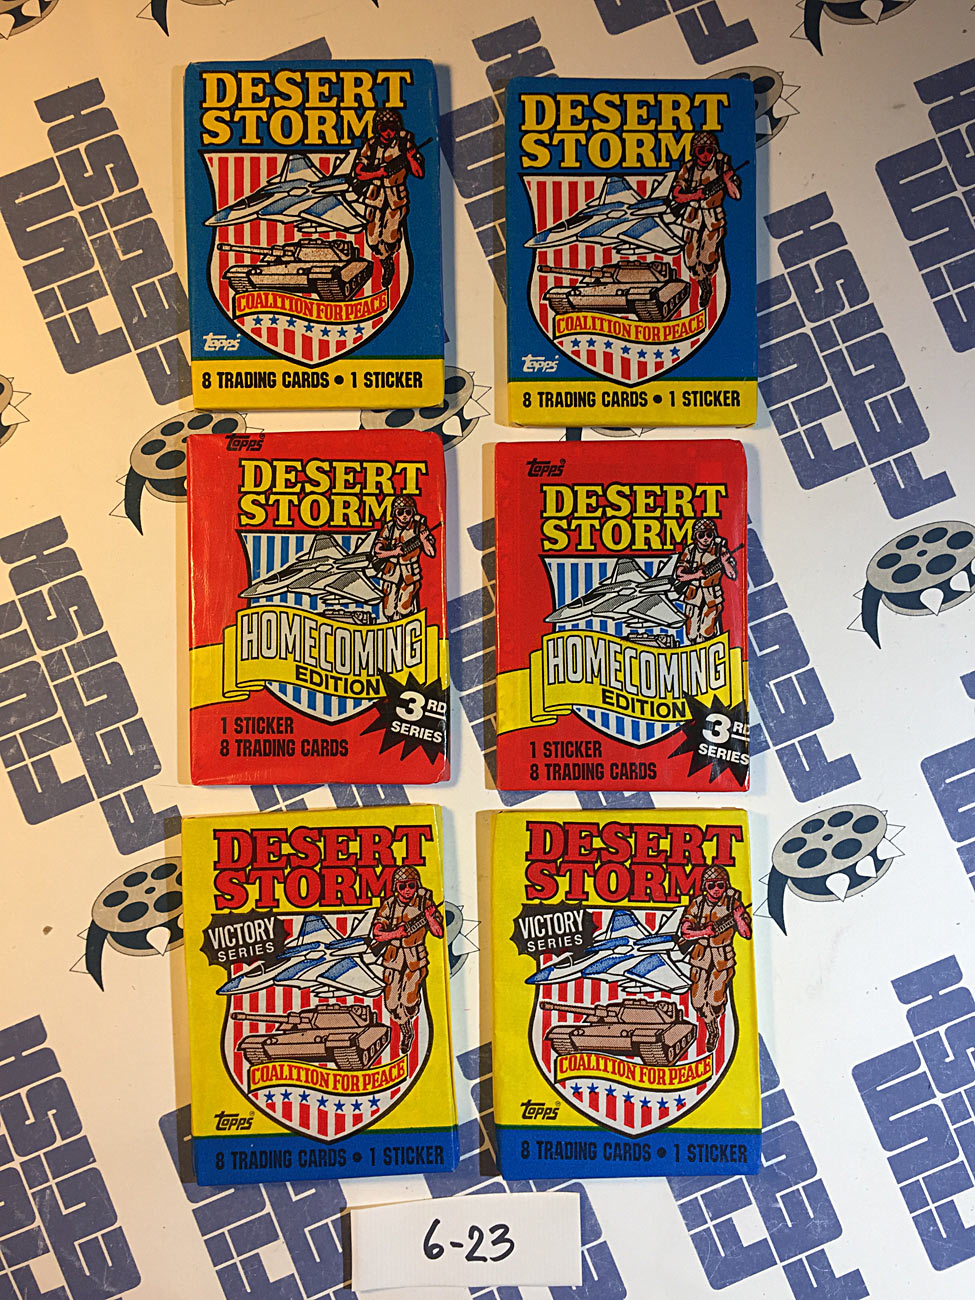 Set of 6 Sealed Topps Desert Storm Trading Card Wax Packs, Homecoming, Coalition For Peace, Victory Series [623]